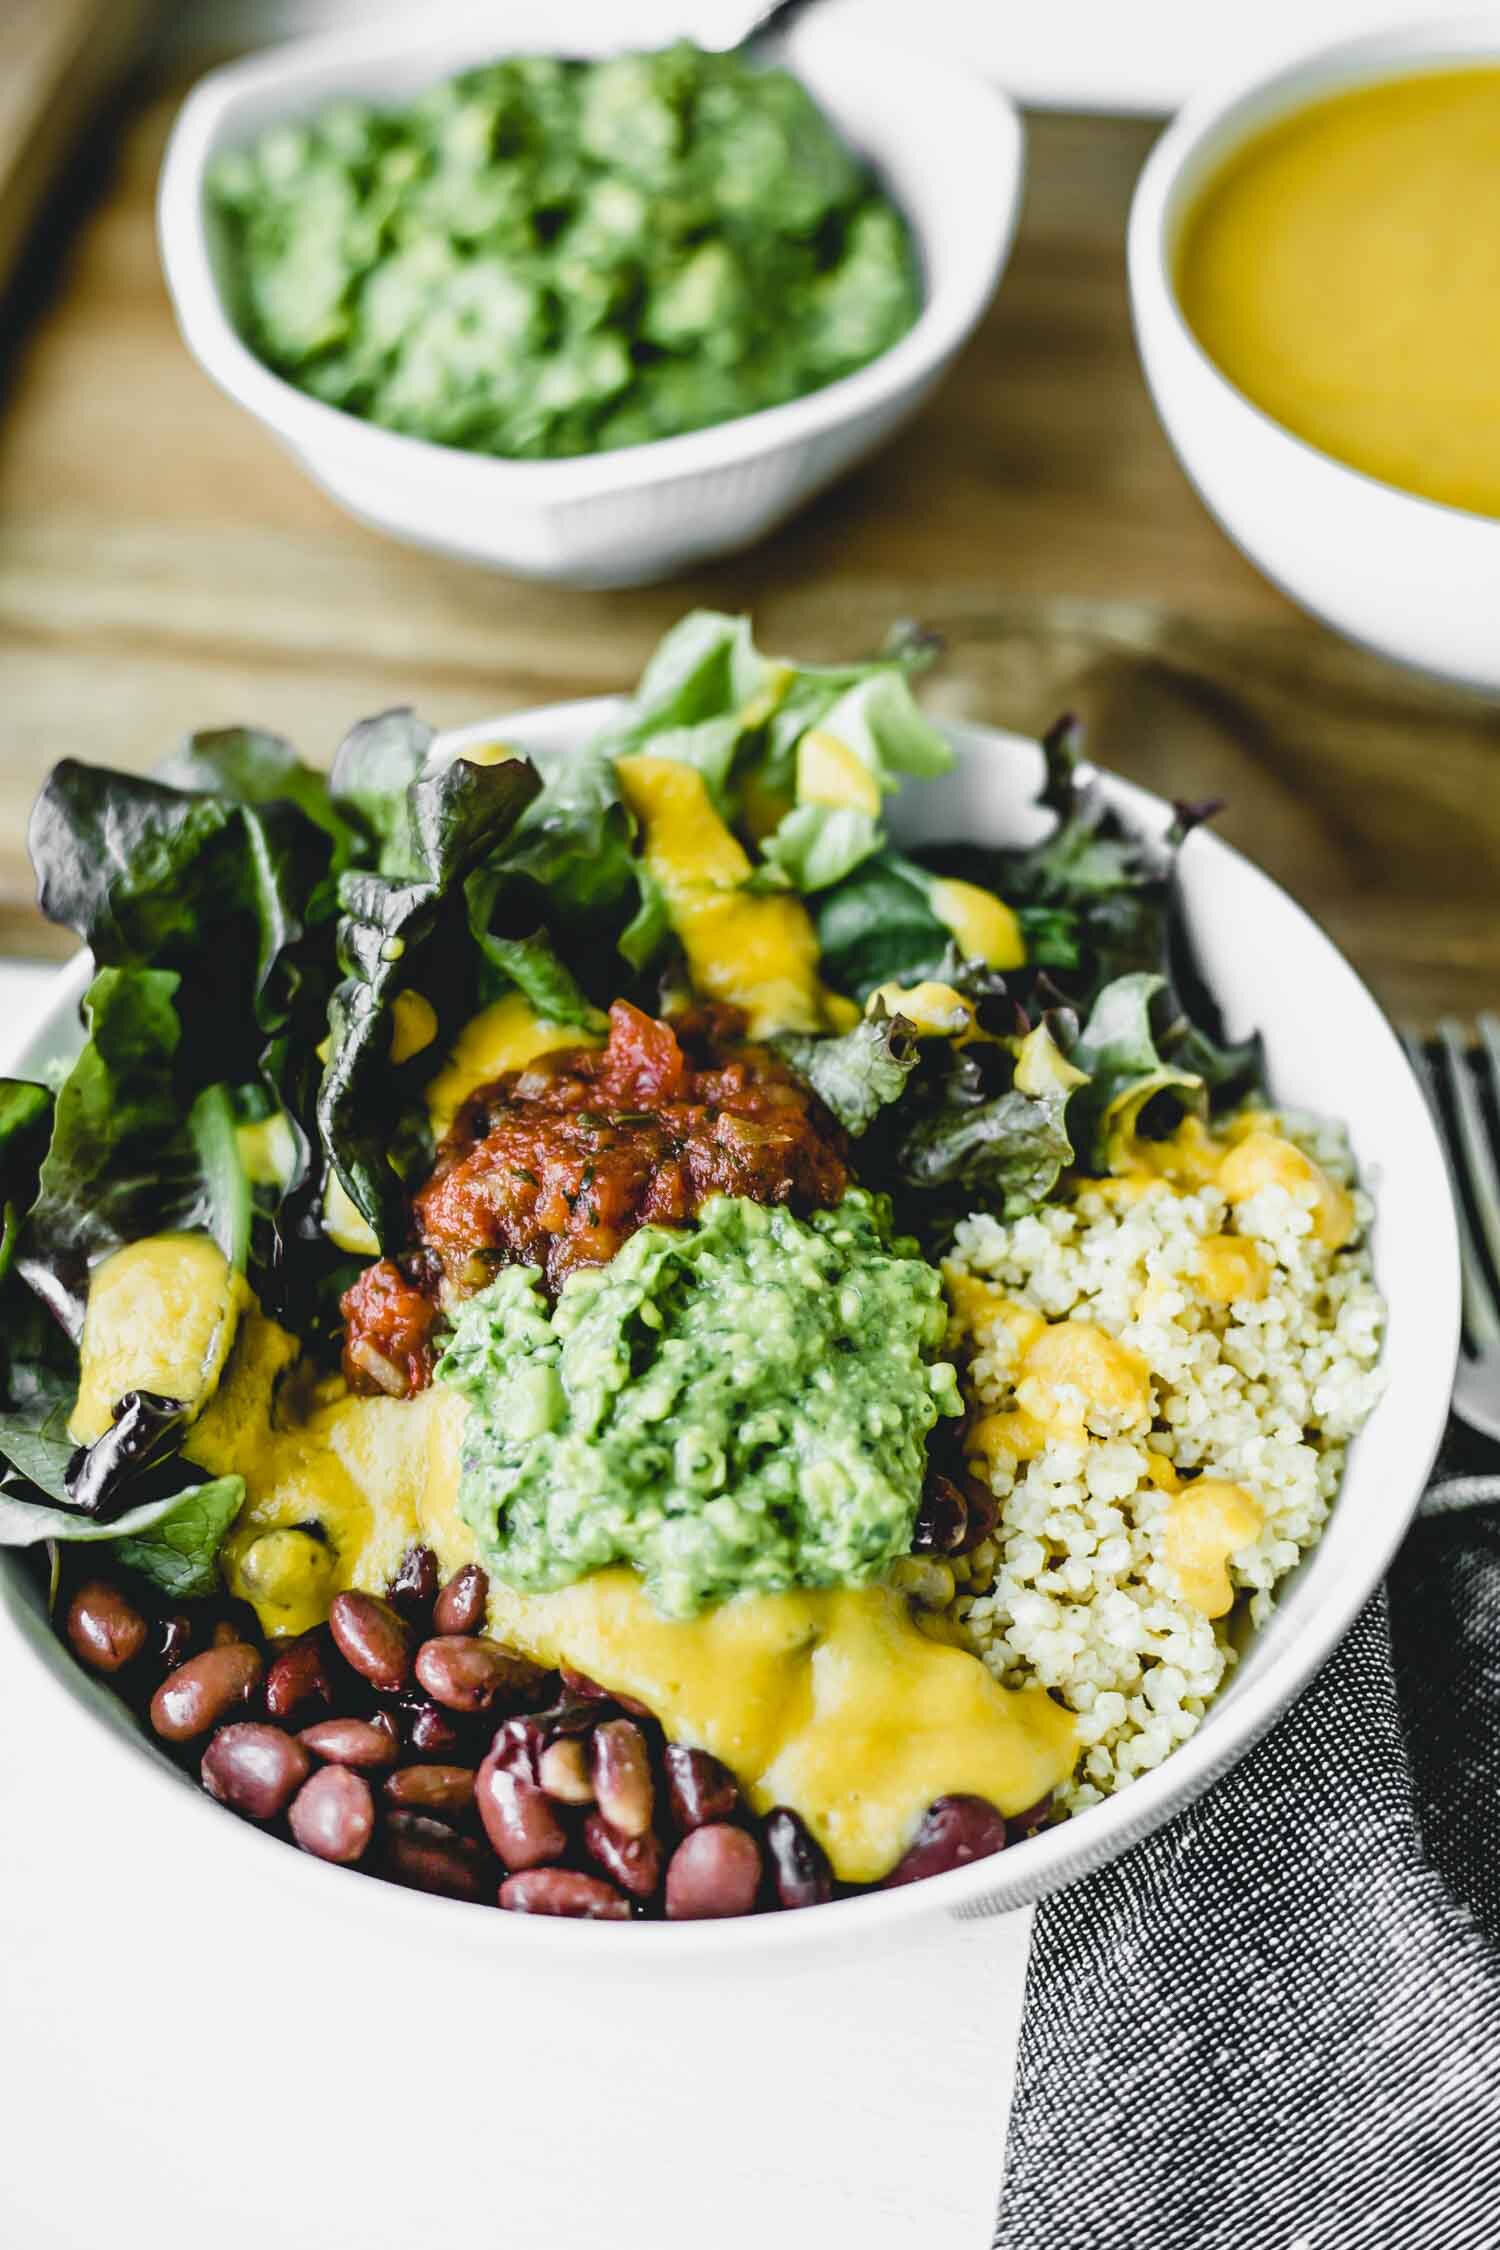 Power Greens Guacamole Recipe with Fresh Spinach | Beautiful Ingredient. Full of flavor and packed with nutrition, this guacamole is boosted with spinach and is a great way to get those extra greens in. #guacamolerecipe #guacamoleeasy #nutritiousrecipe #greens #guacamolerecipespinach #homemadeguac